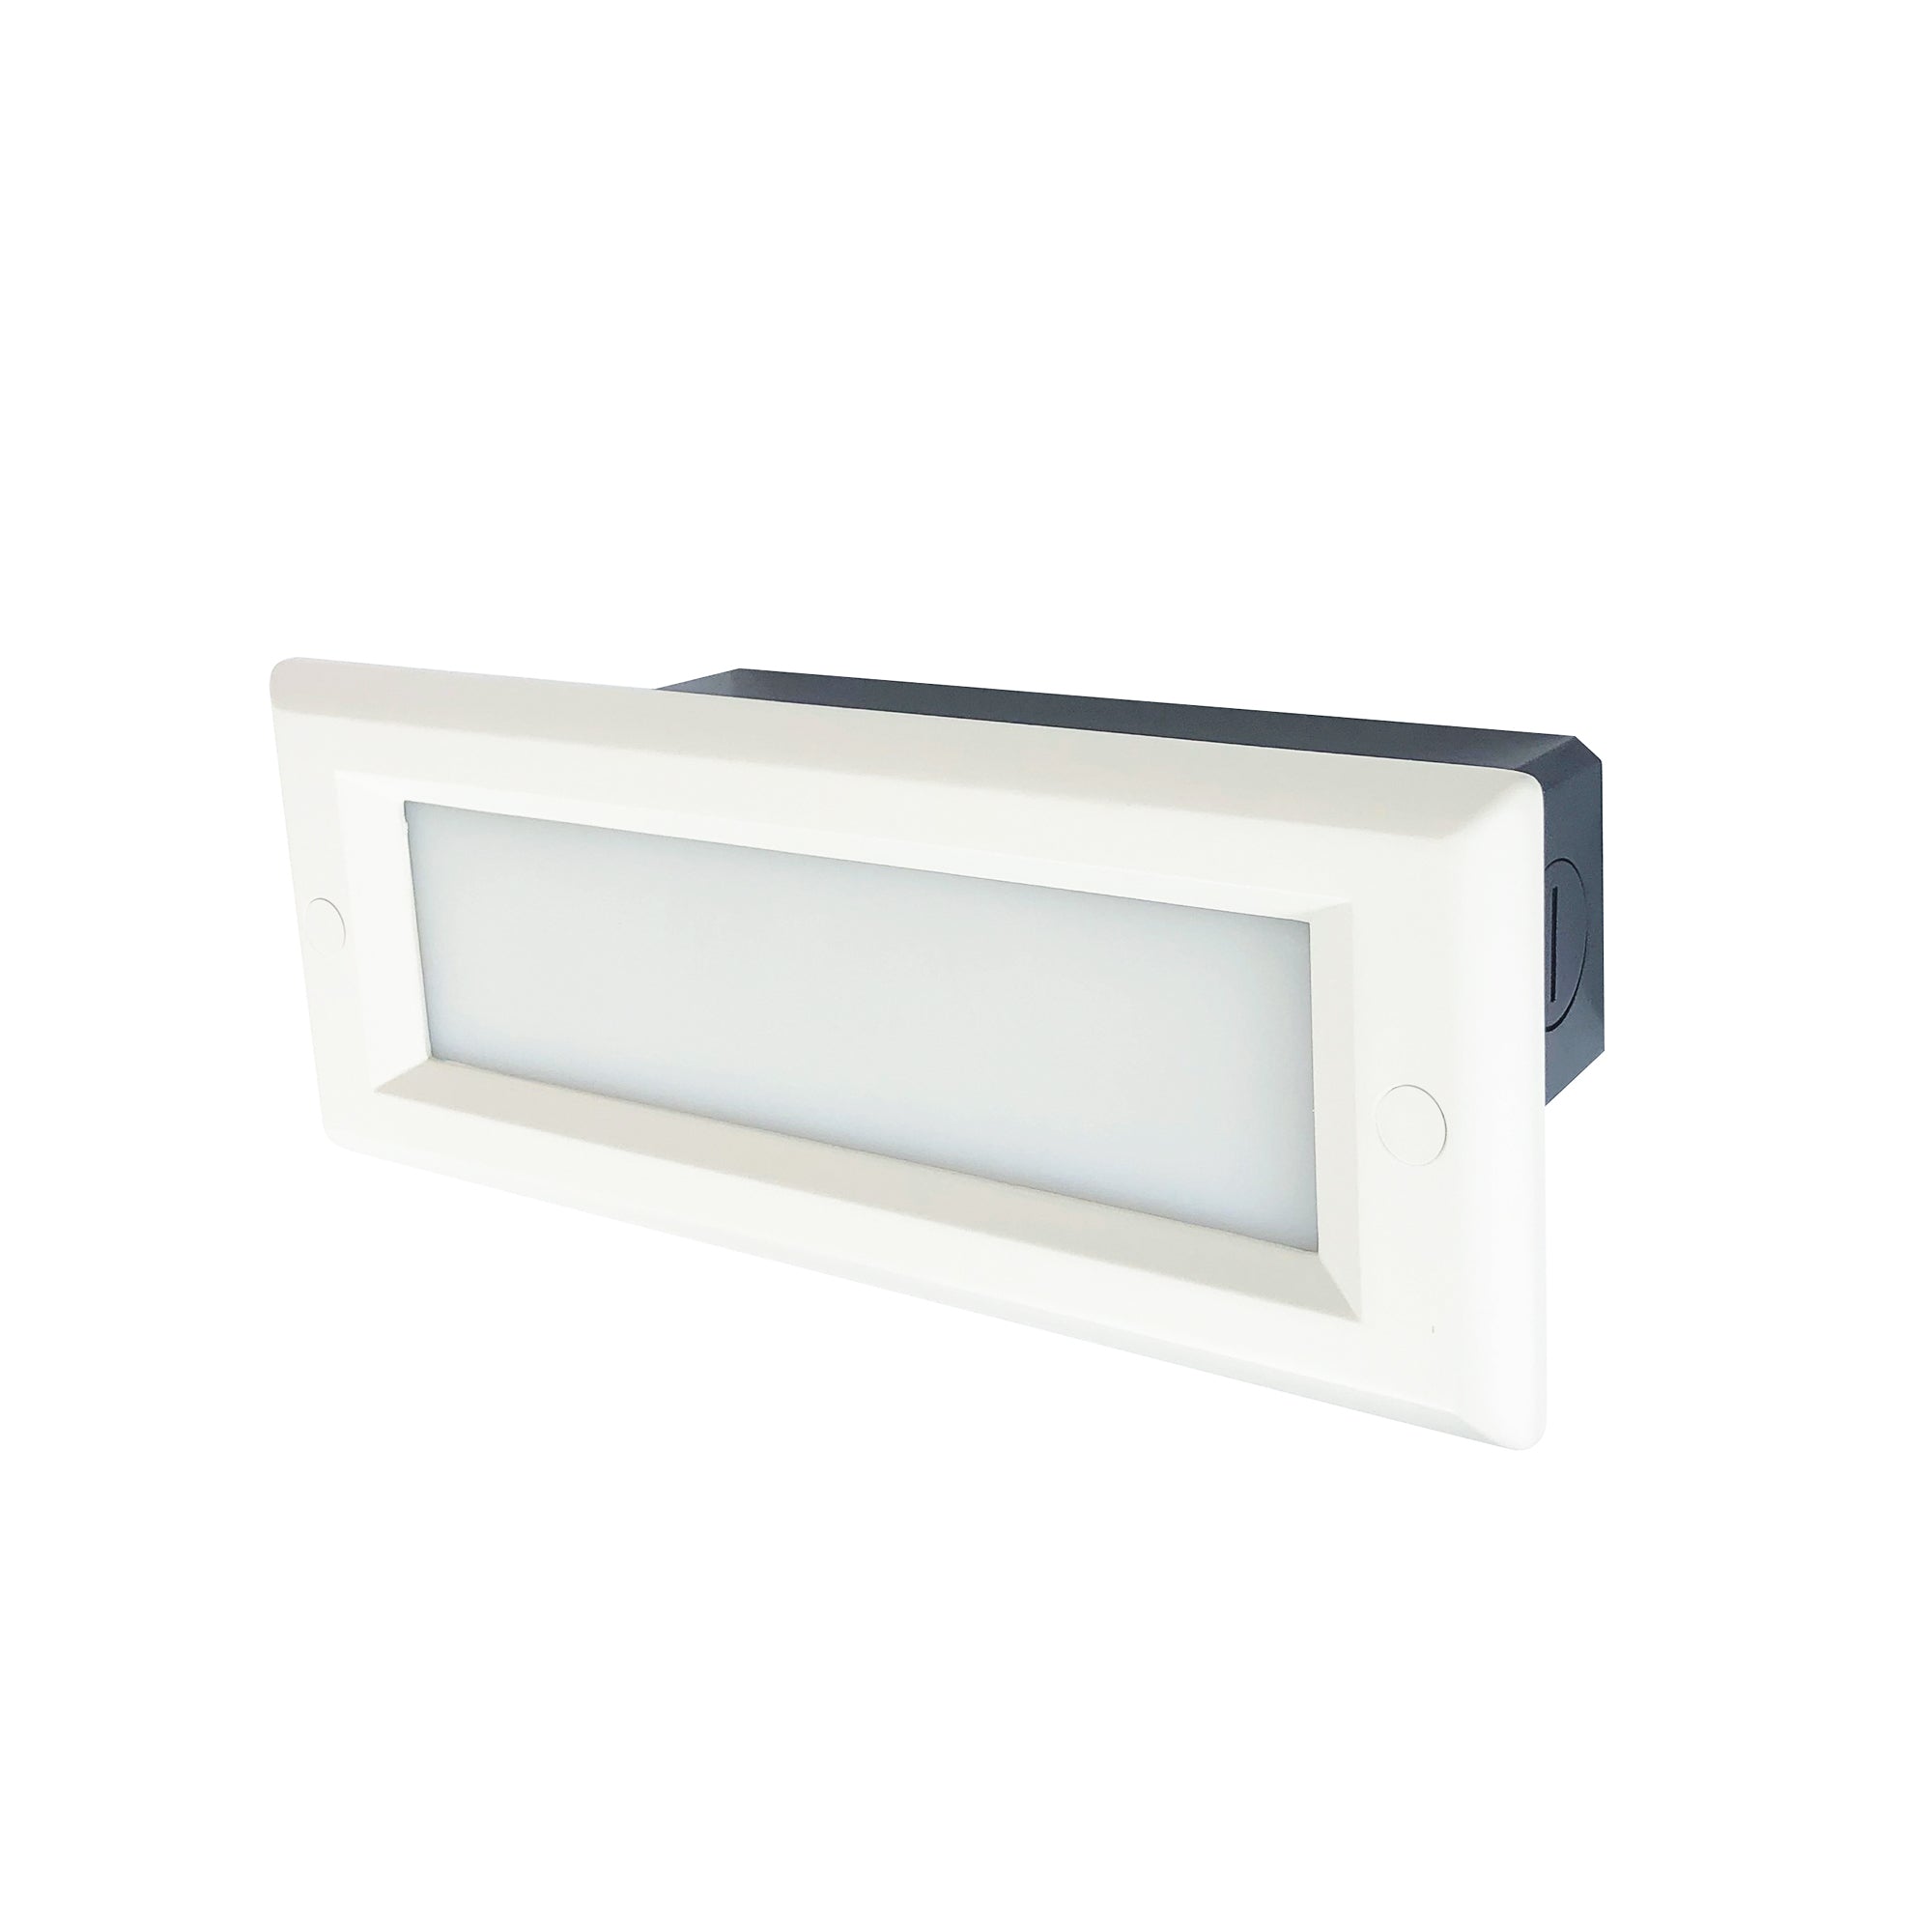 Nora Lighting NSW-842/32W - Step Light - Brick Die-Cast LED Step Light w/ Frosted Lens Face Plate, 146lm / 4.6W, 3000K, White Finish